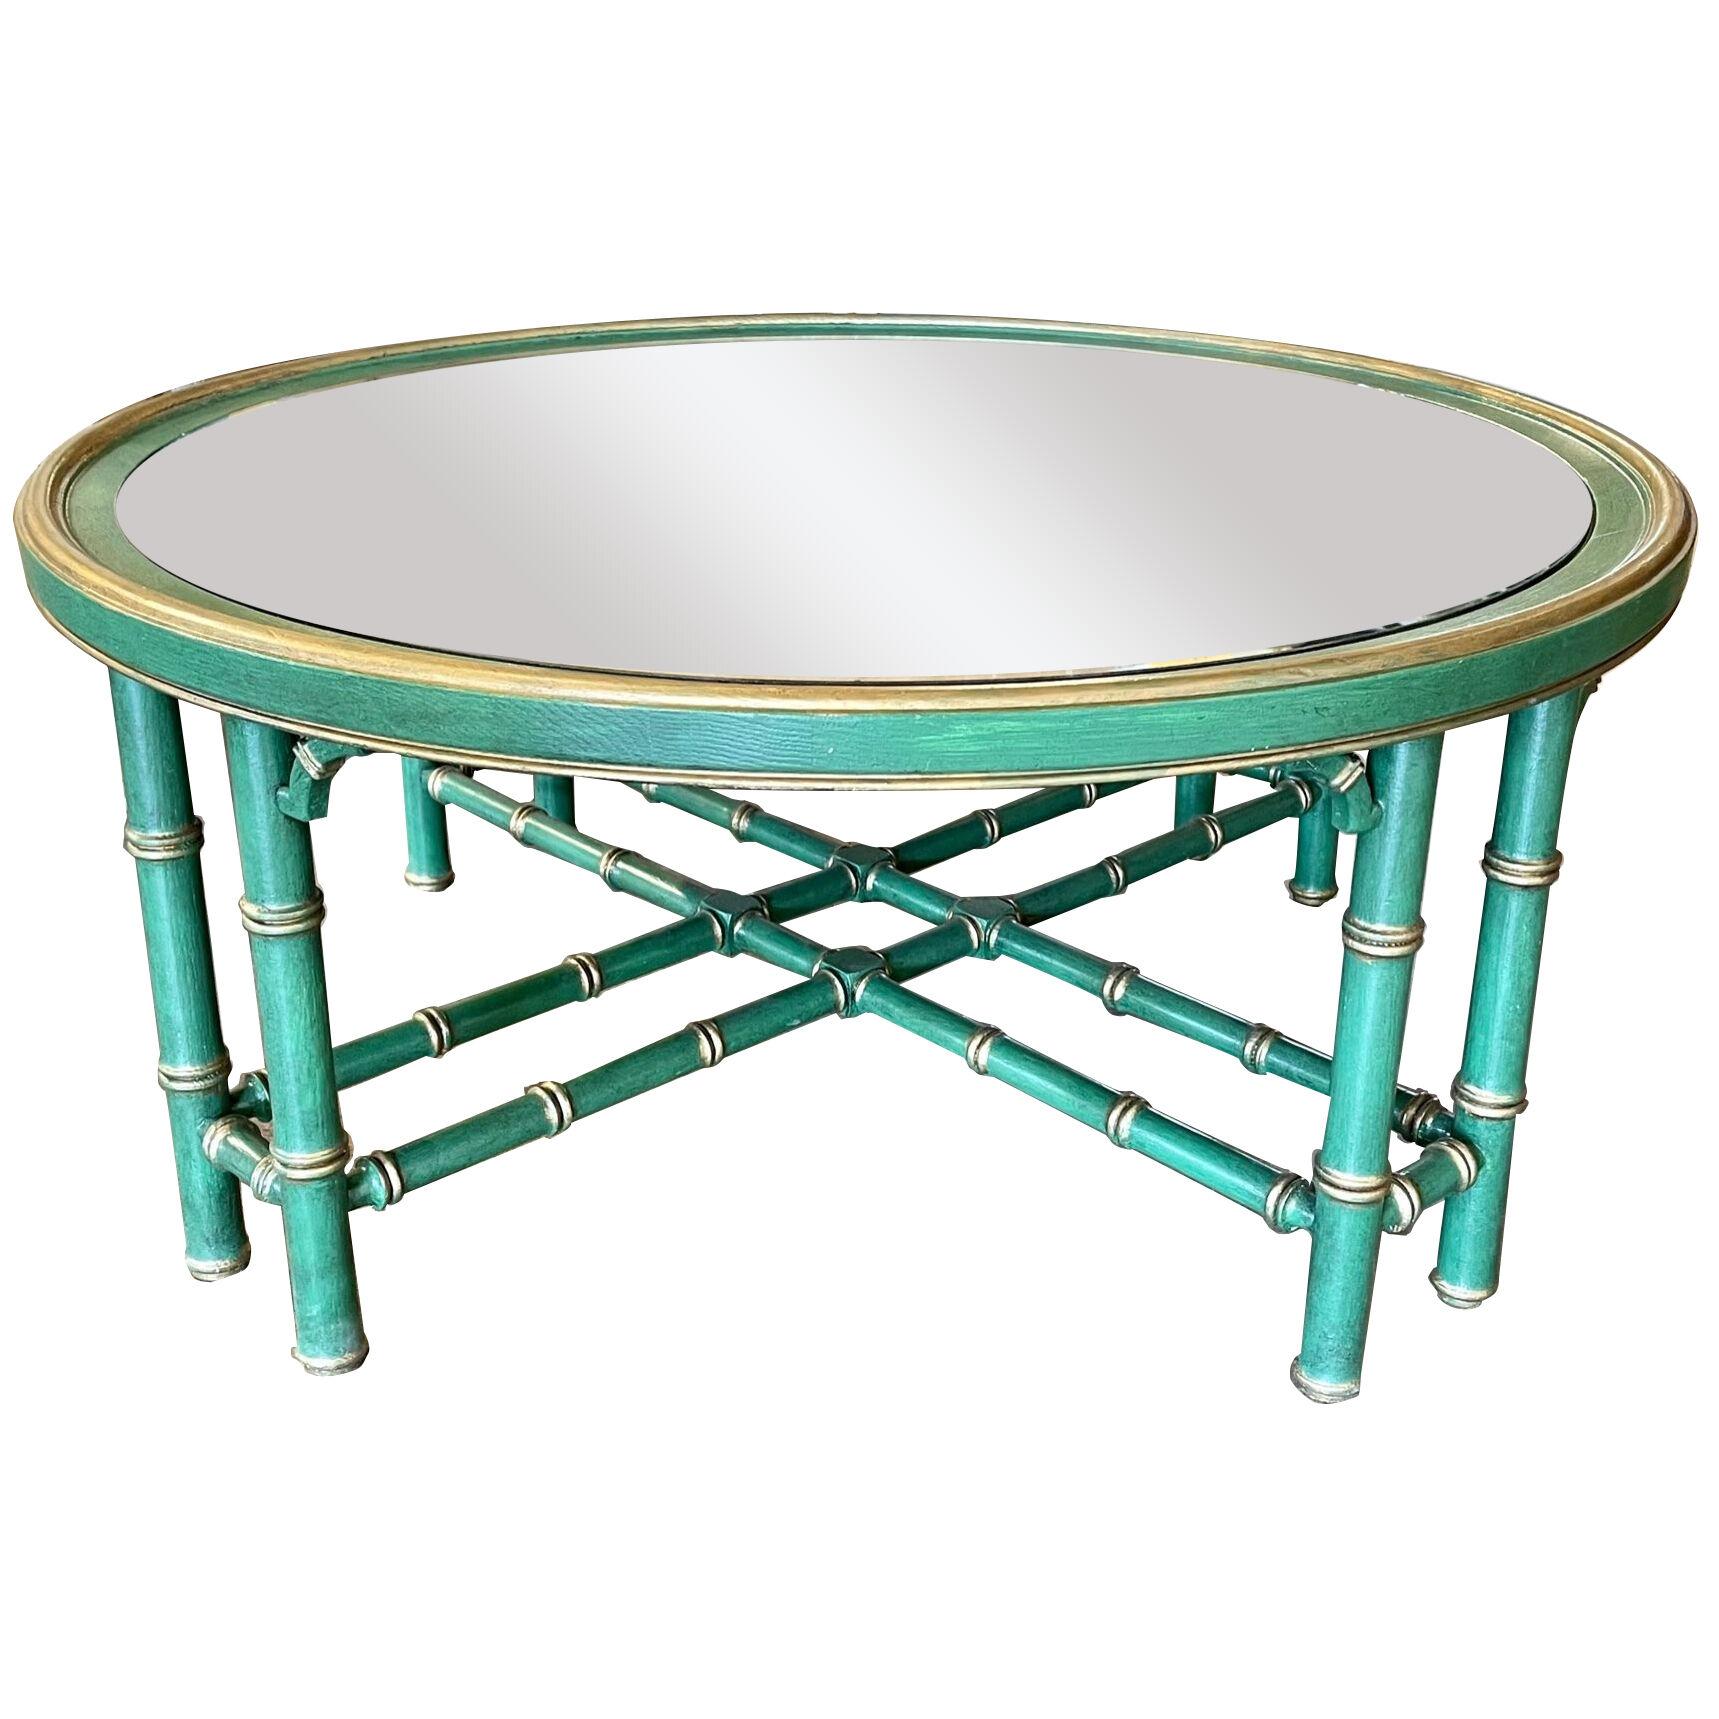 Vintage Italian Painted Bamboo Form Coffee Table with Mirrored Top